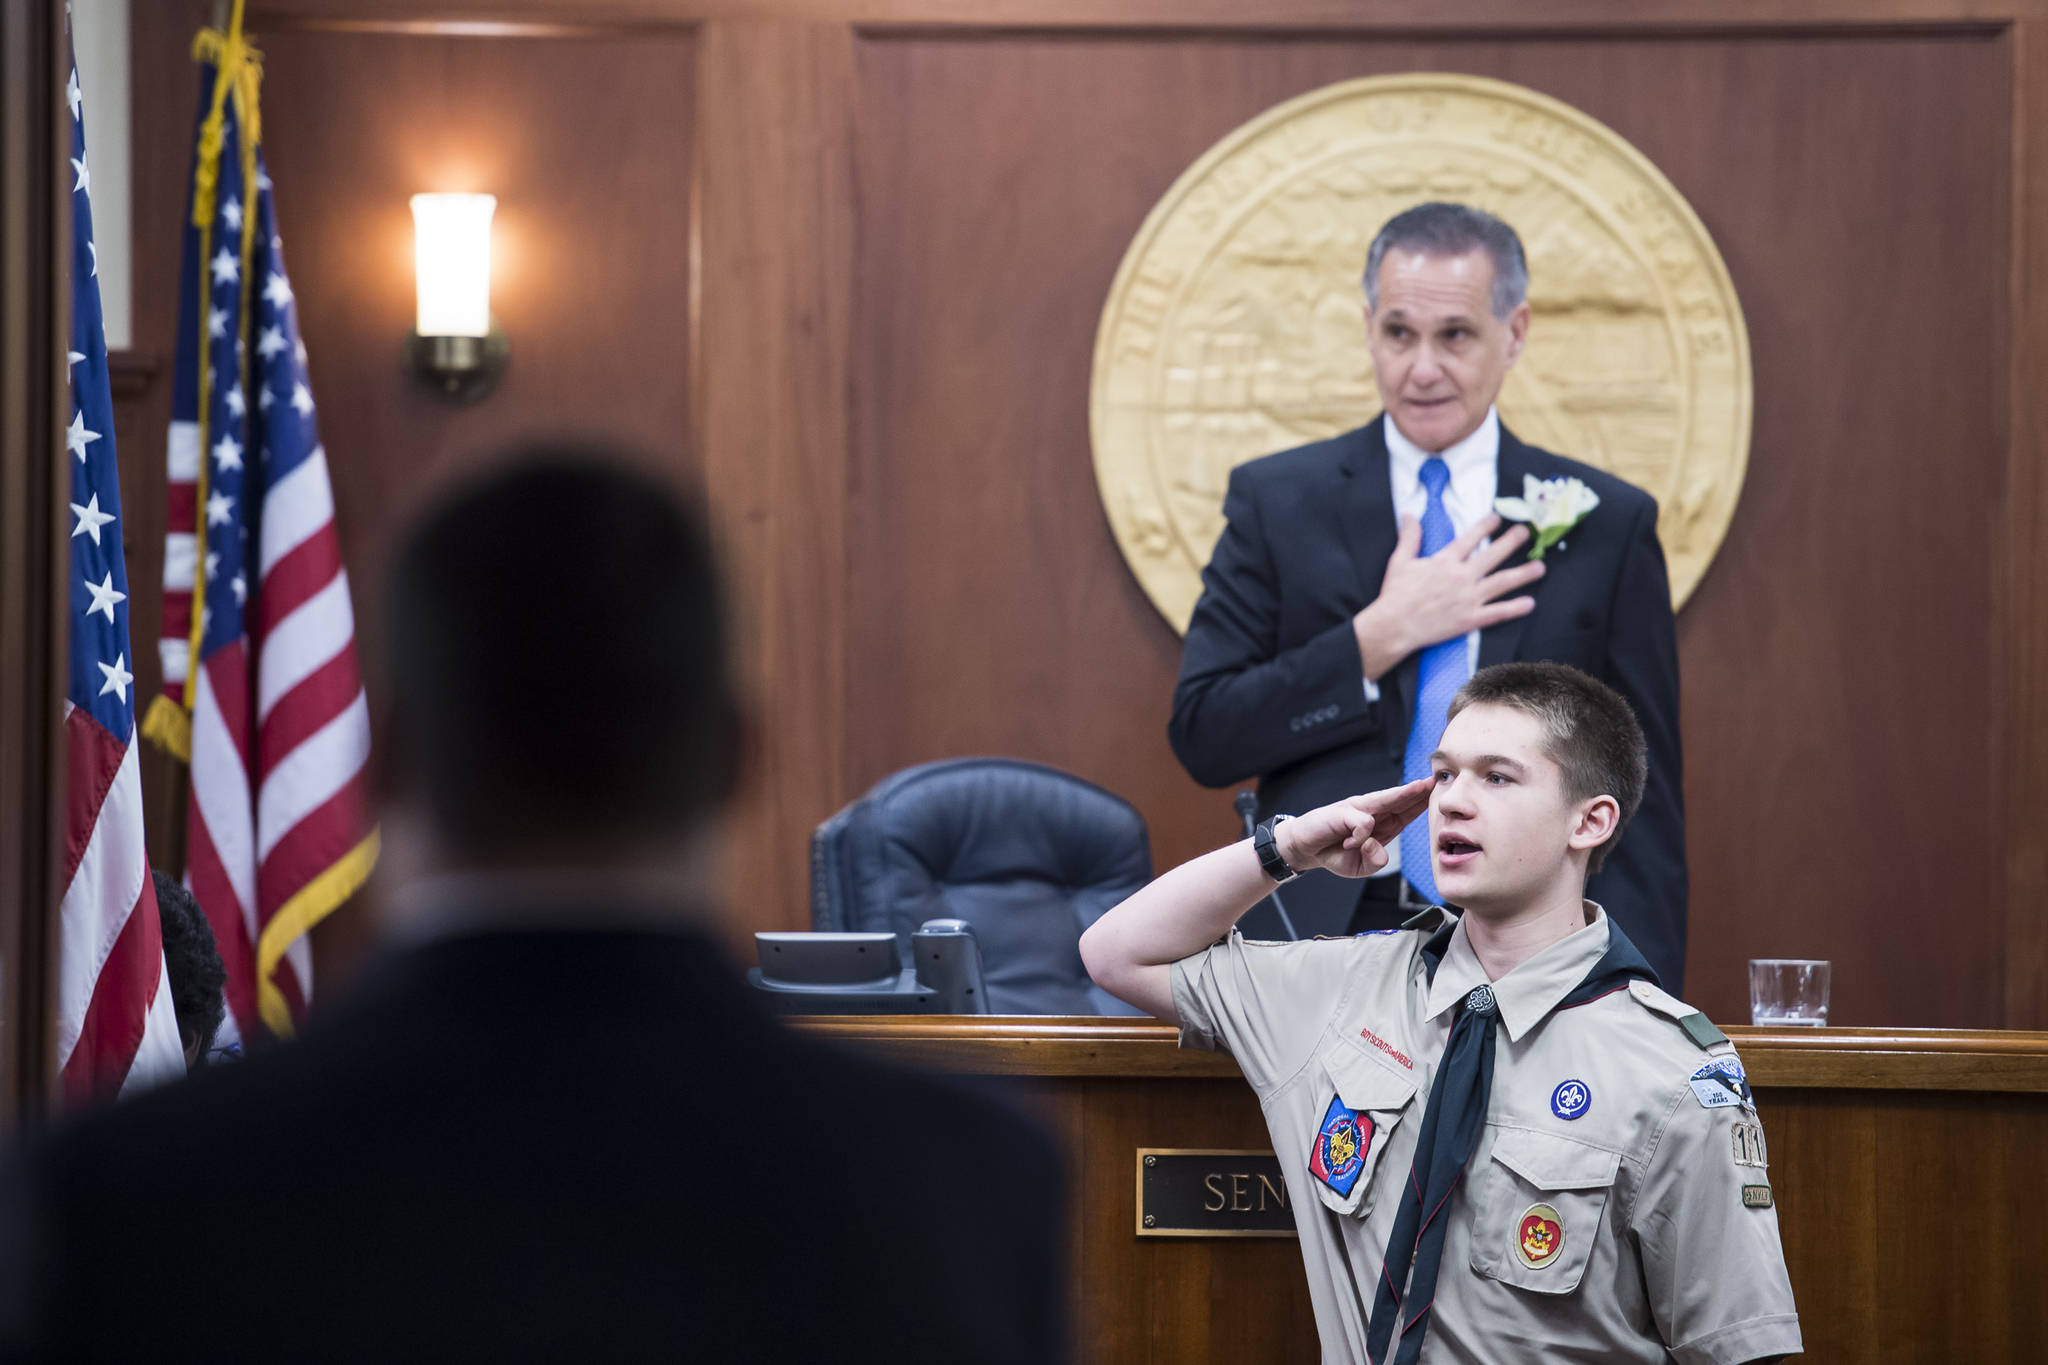 Boy Scout Orion Swanson leads the Pledge of Allegiance of the United States on the opening day of the 31st Session of the Alaska Legislature on Tuesday, Jan. 15, 2019. (Michael Penn | Juneau Empire)